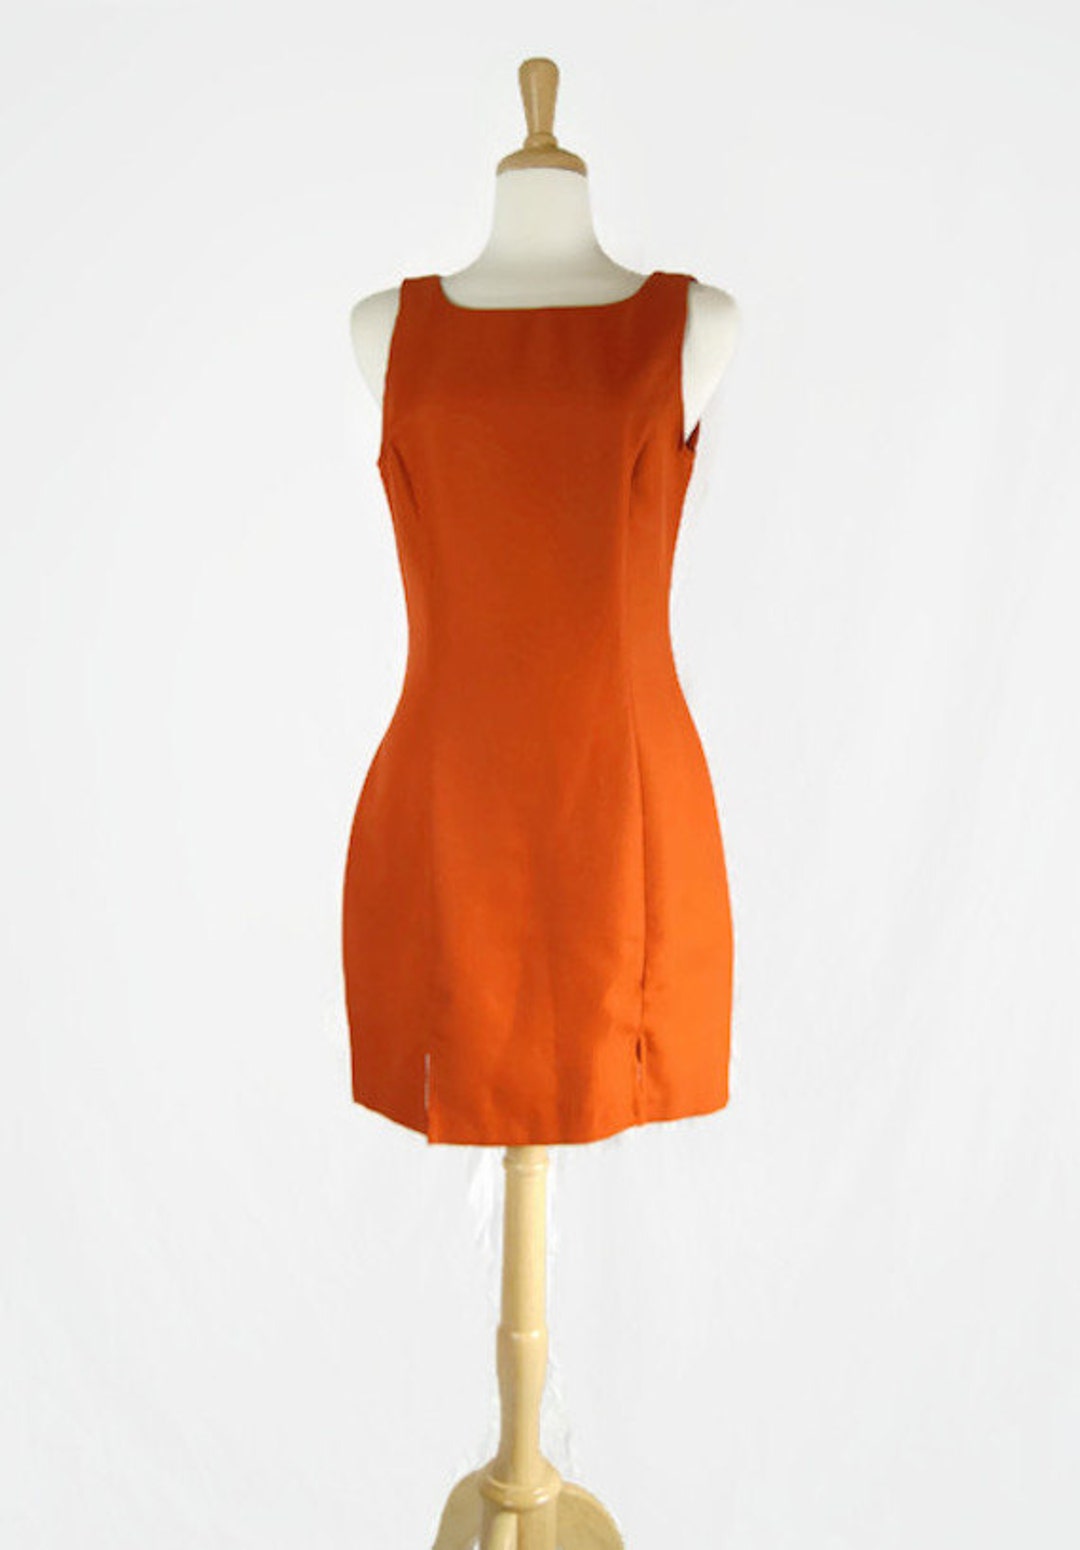 Vintage Alyn Paige Sleeveless Dress Made in USA - Etsy